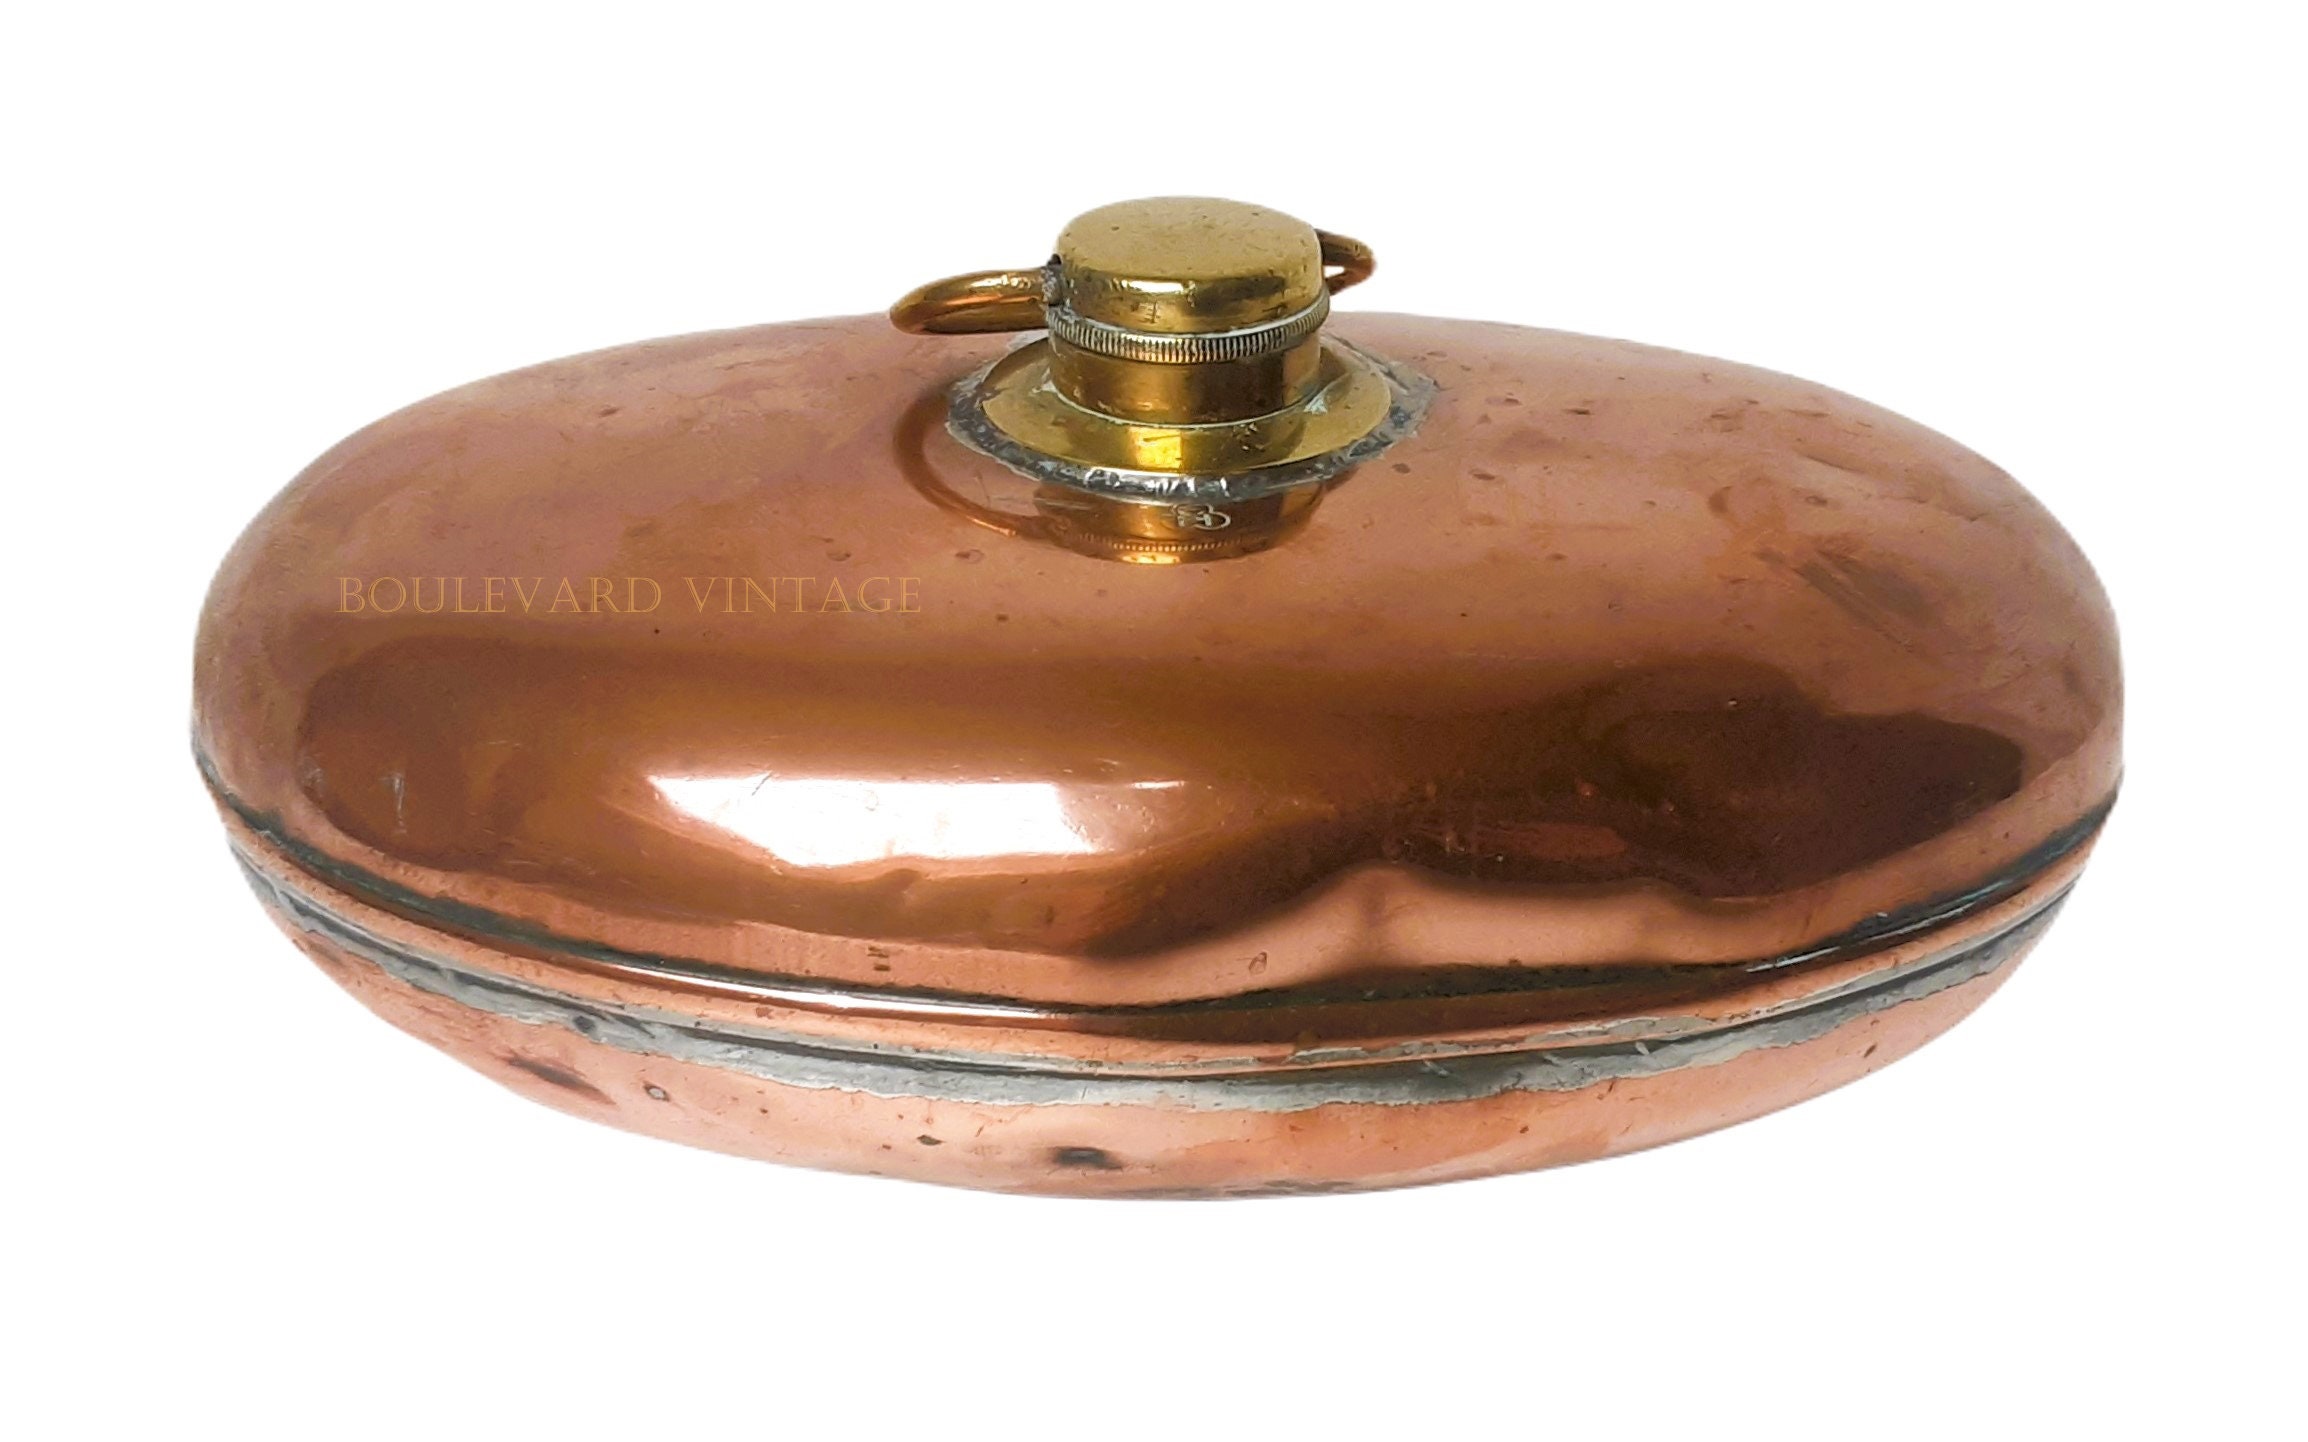 Copper Plate Warmer - French Metro Antiques